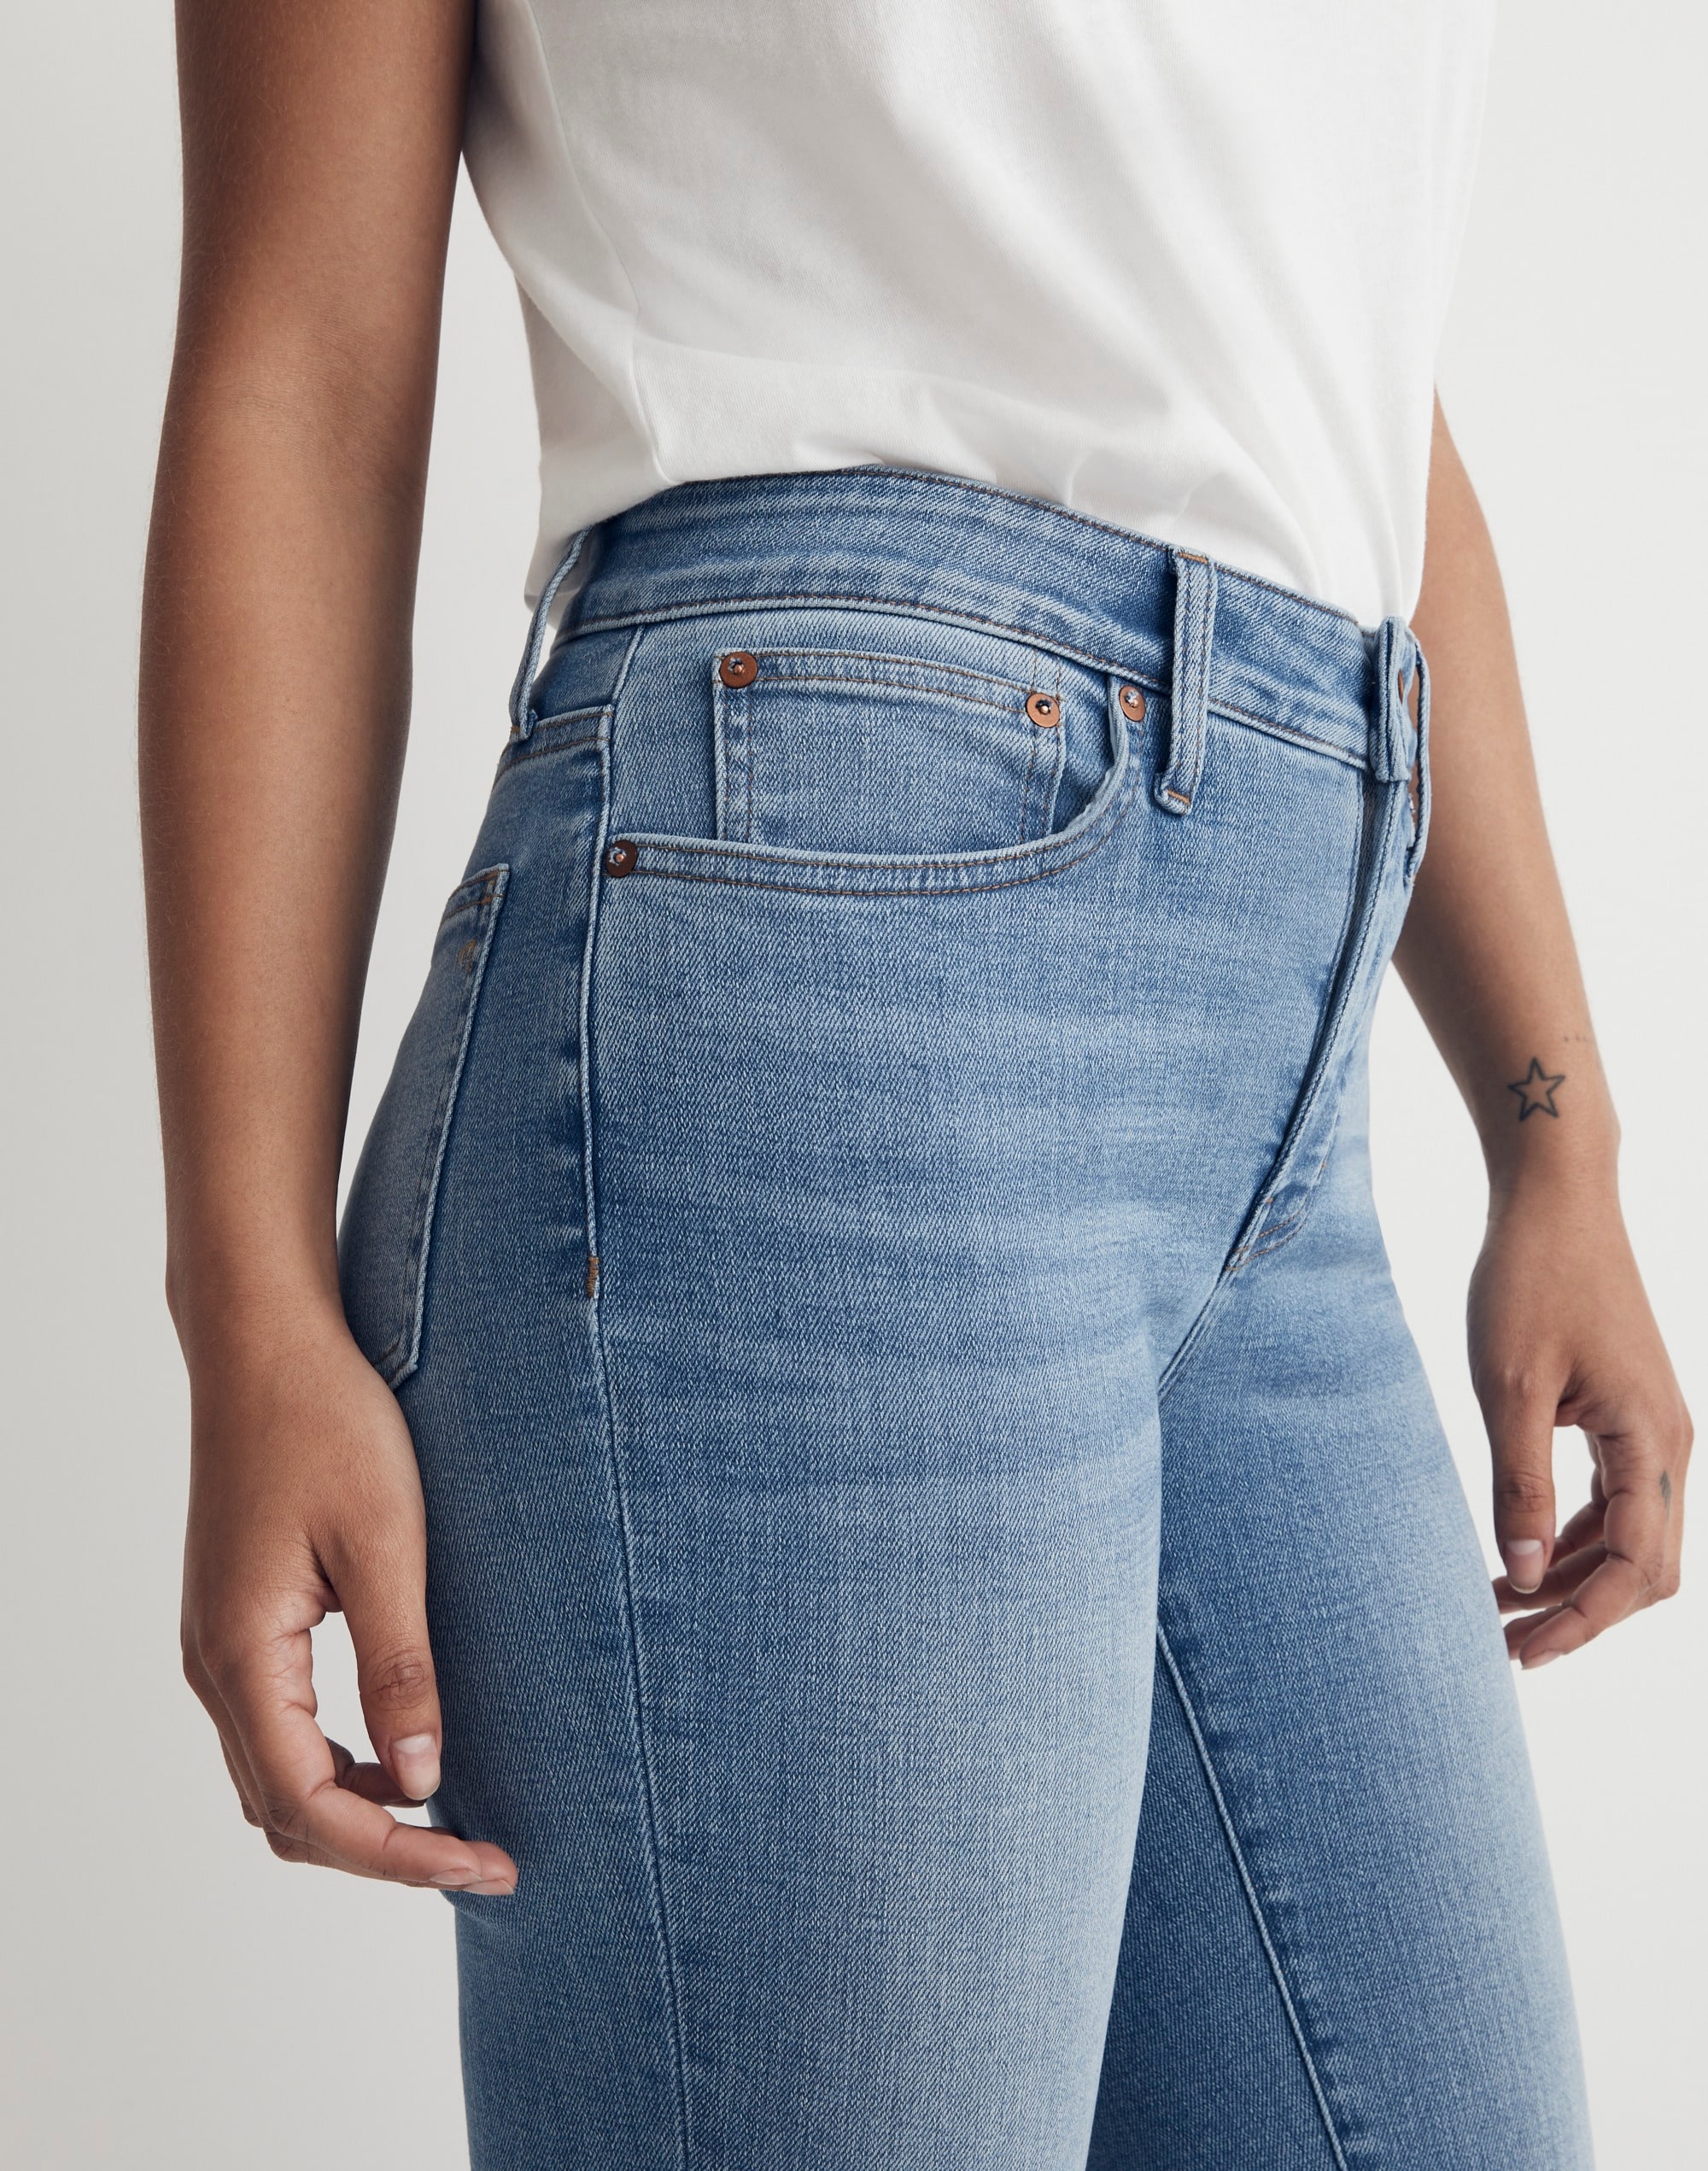 Madewell launches Curvy Shop